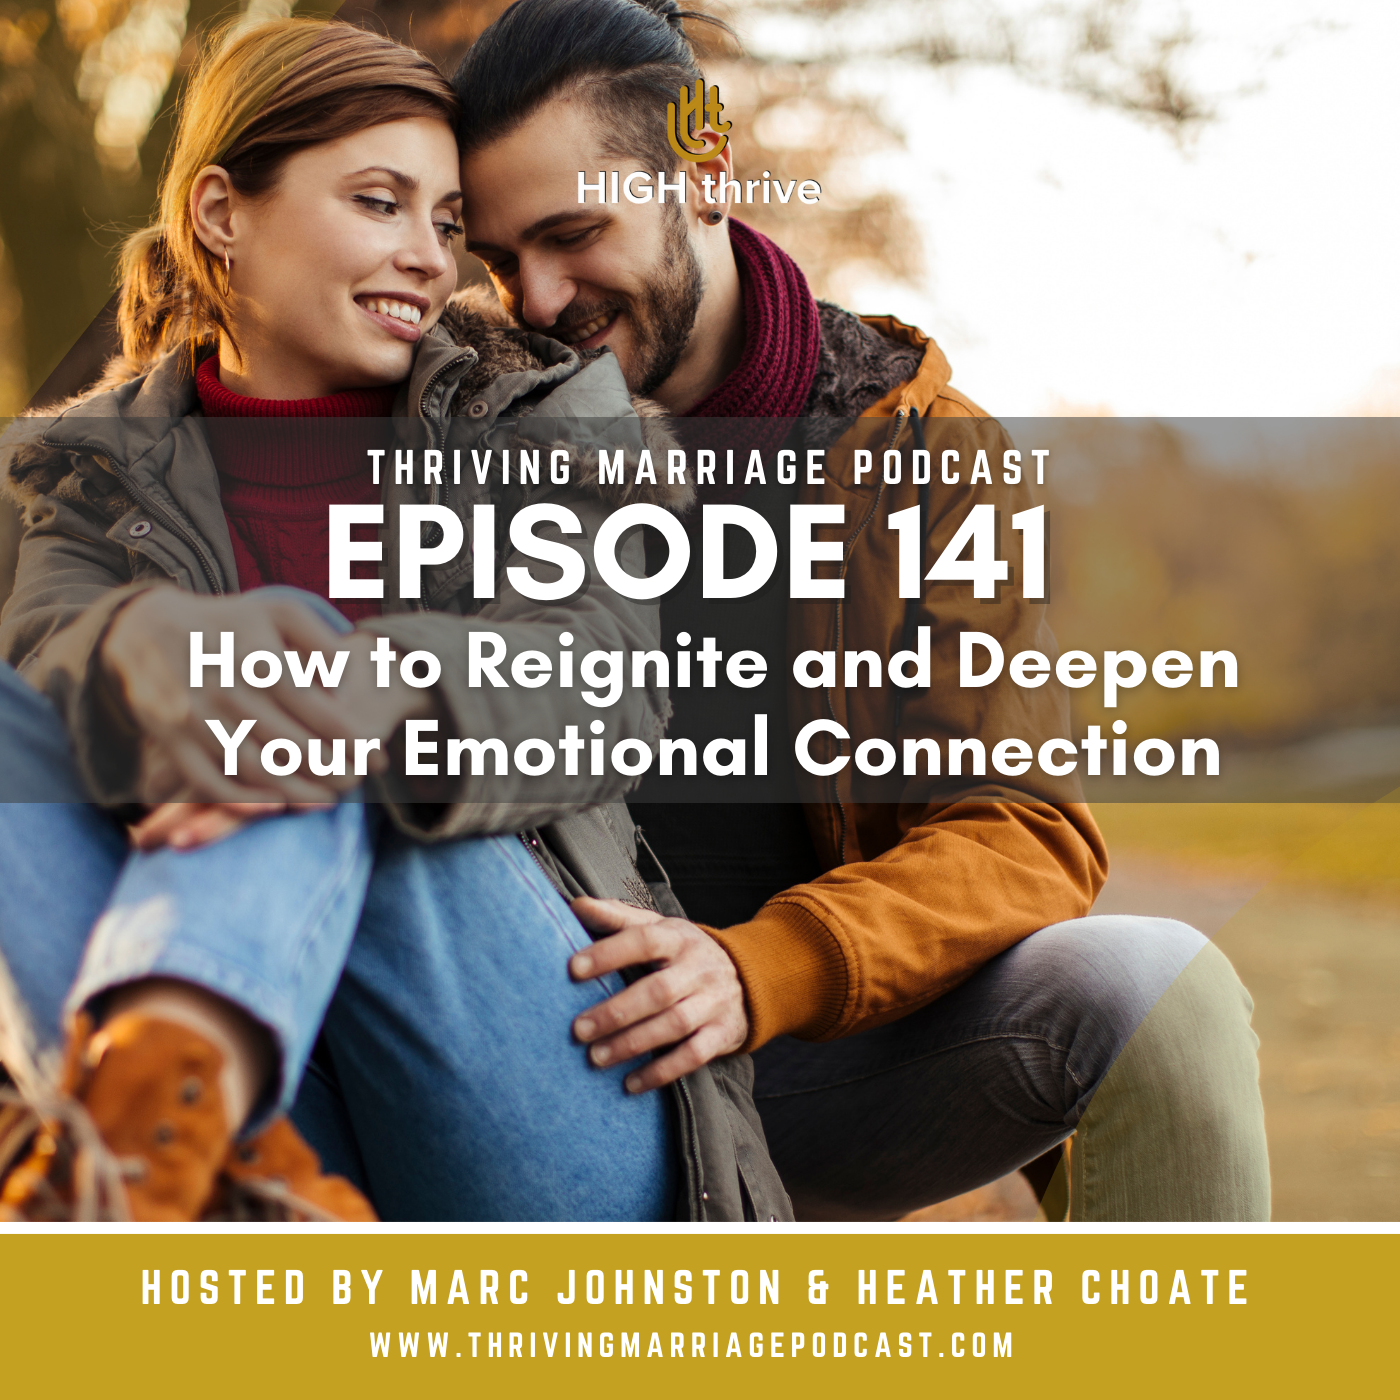 Episode 141: PODCAST 141 How to Reignite and Deepen Your Emotional Connection